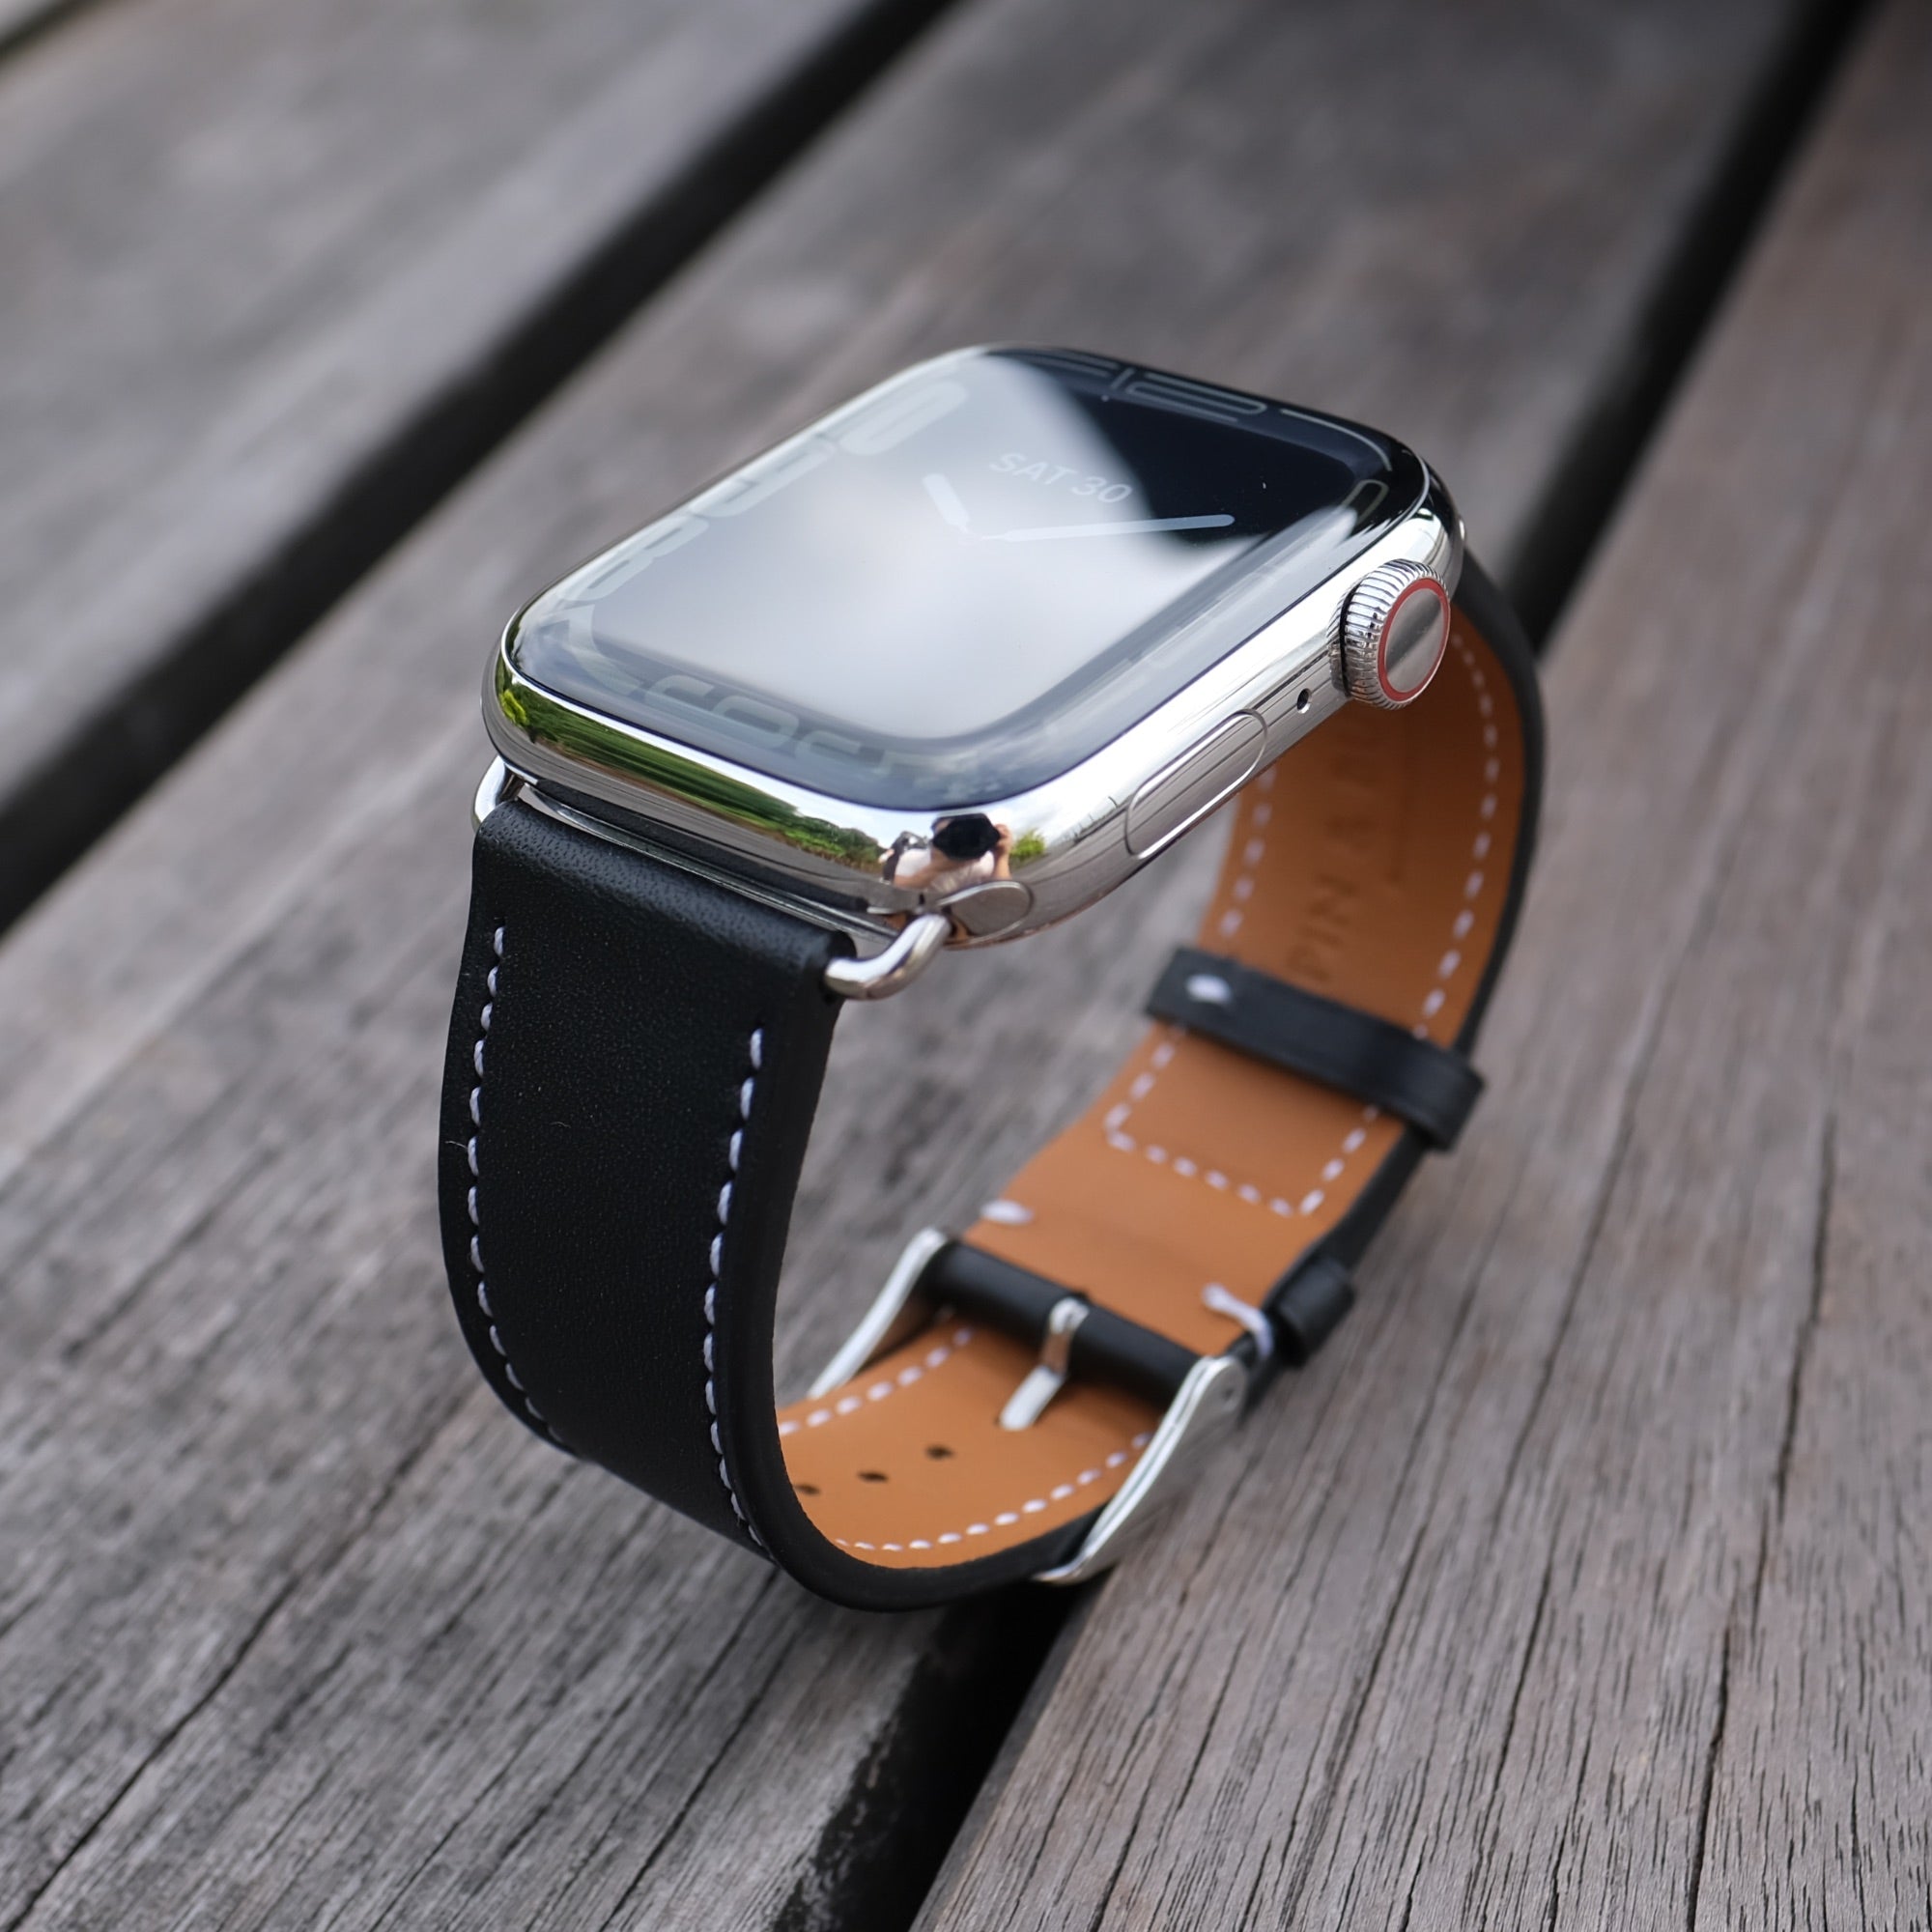 Levelo Royal Stainless Steel Apple Watch Band - 49mm